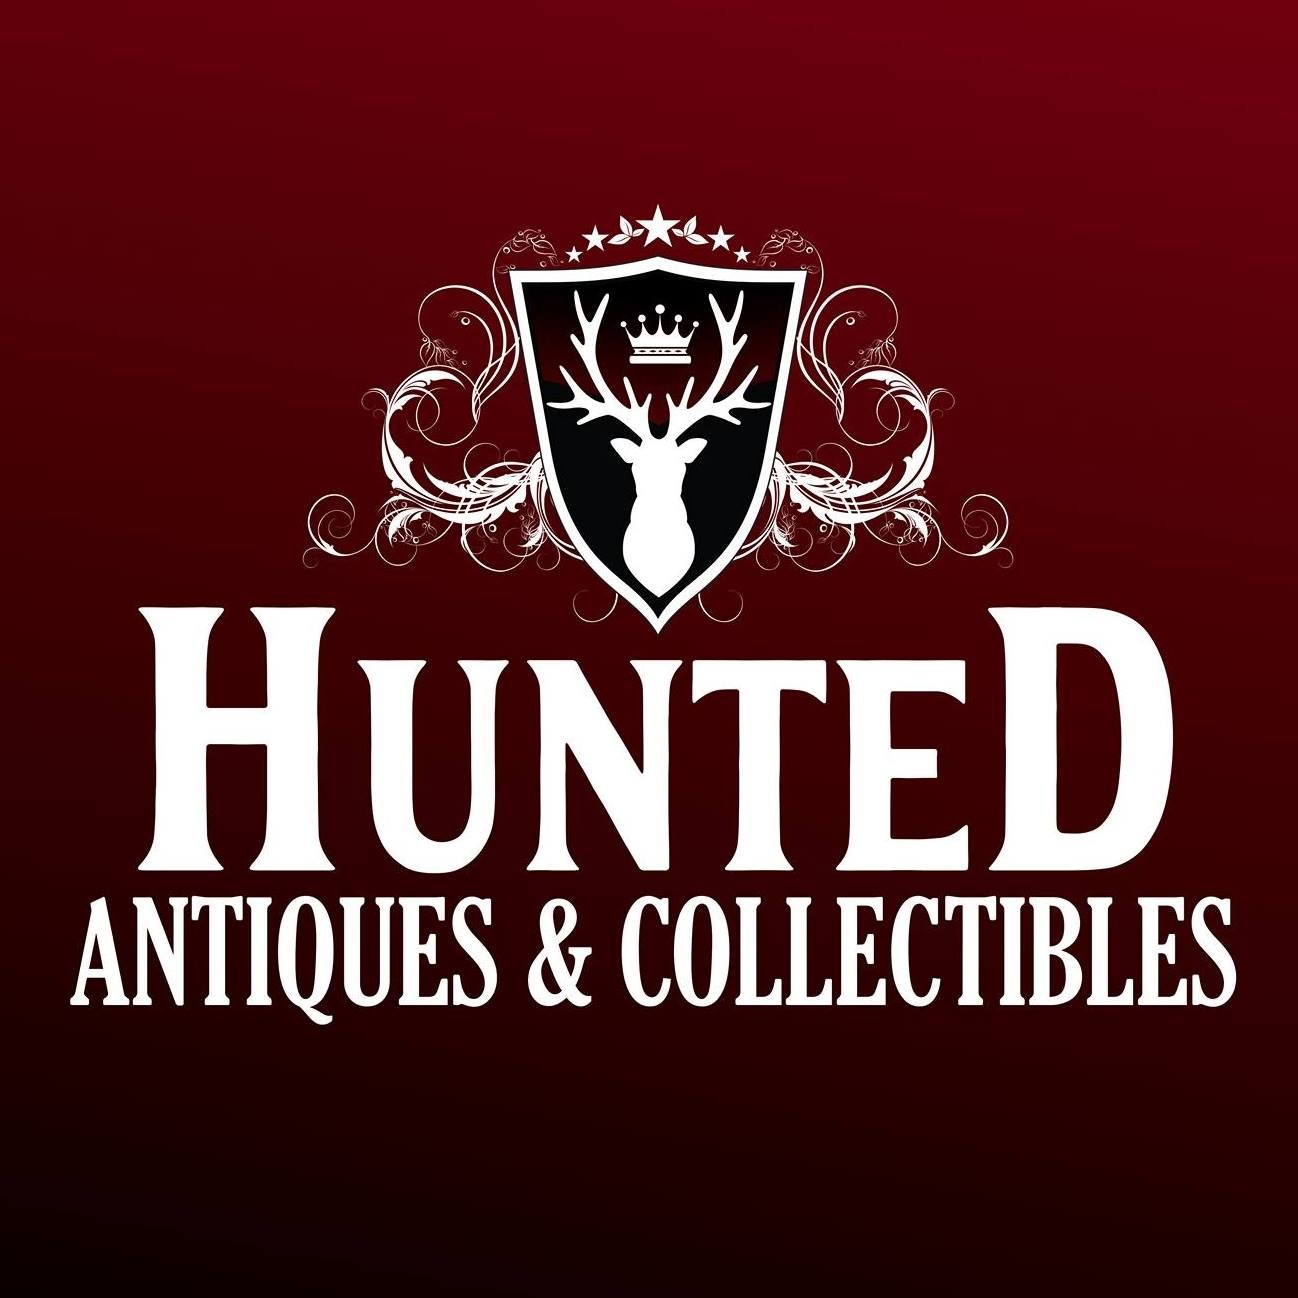 Hunted Antiques & Collectables